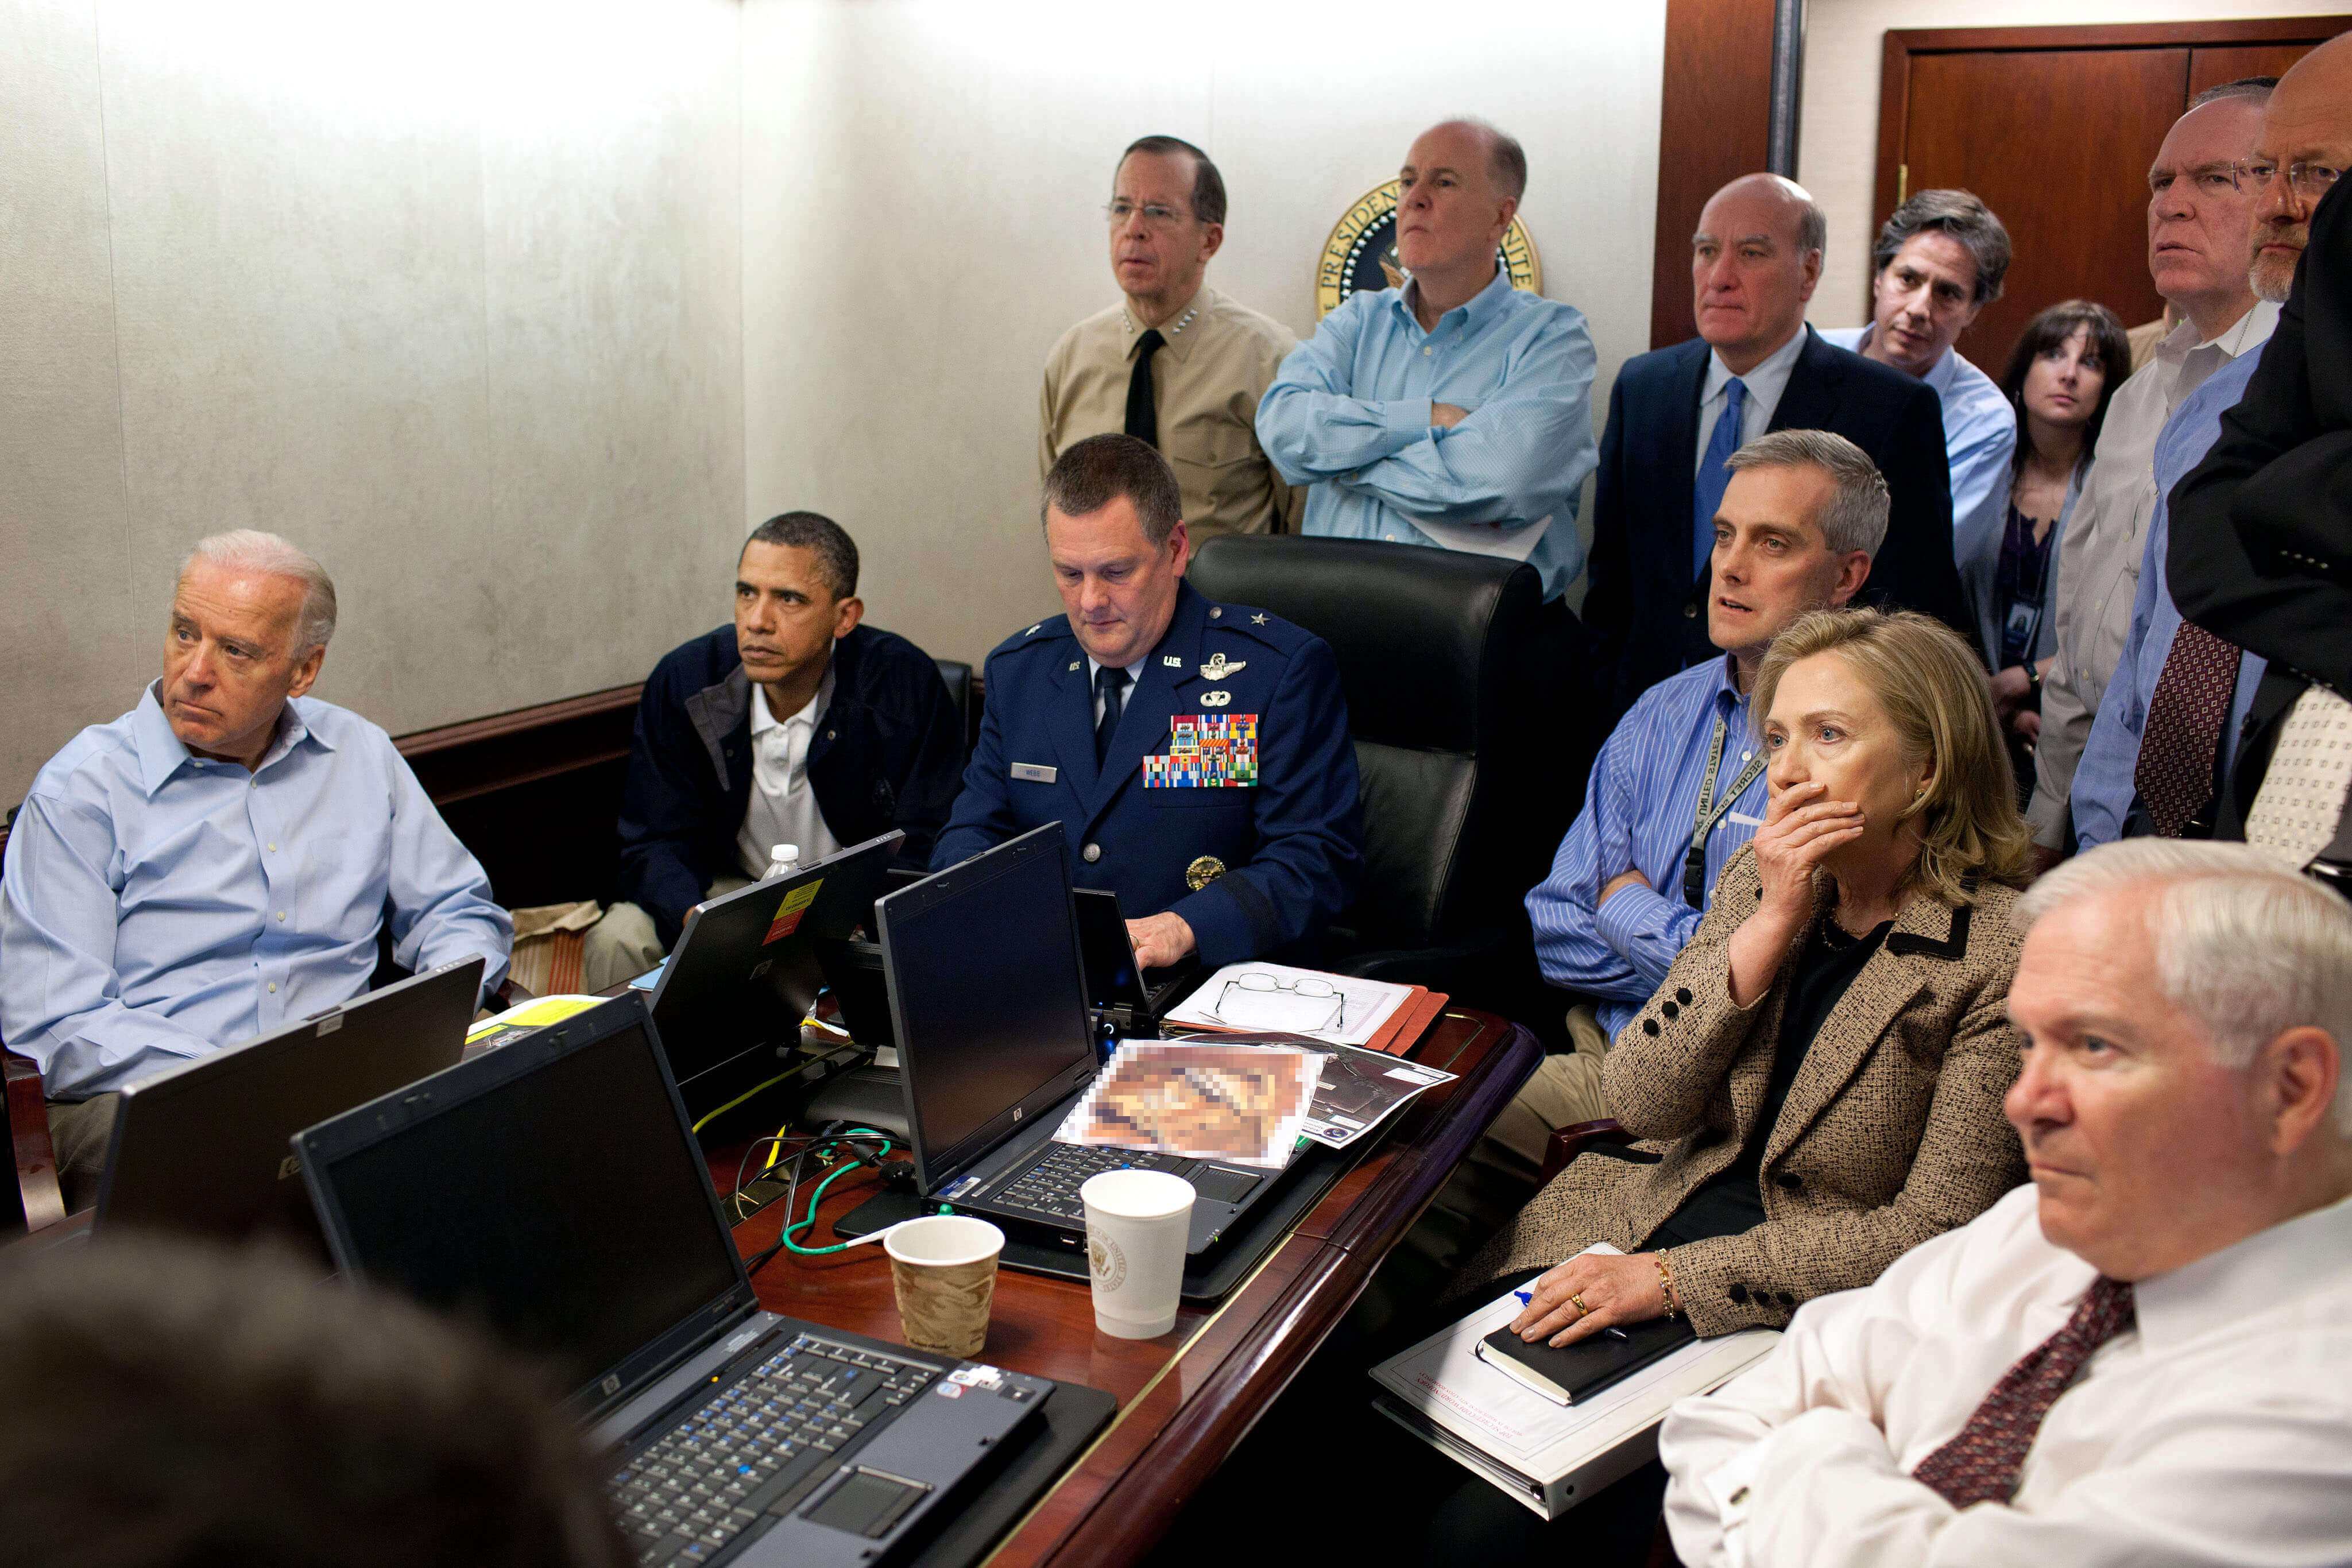 The Situation Room